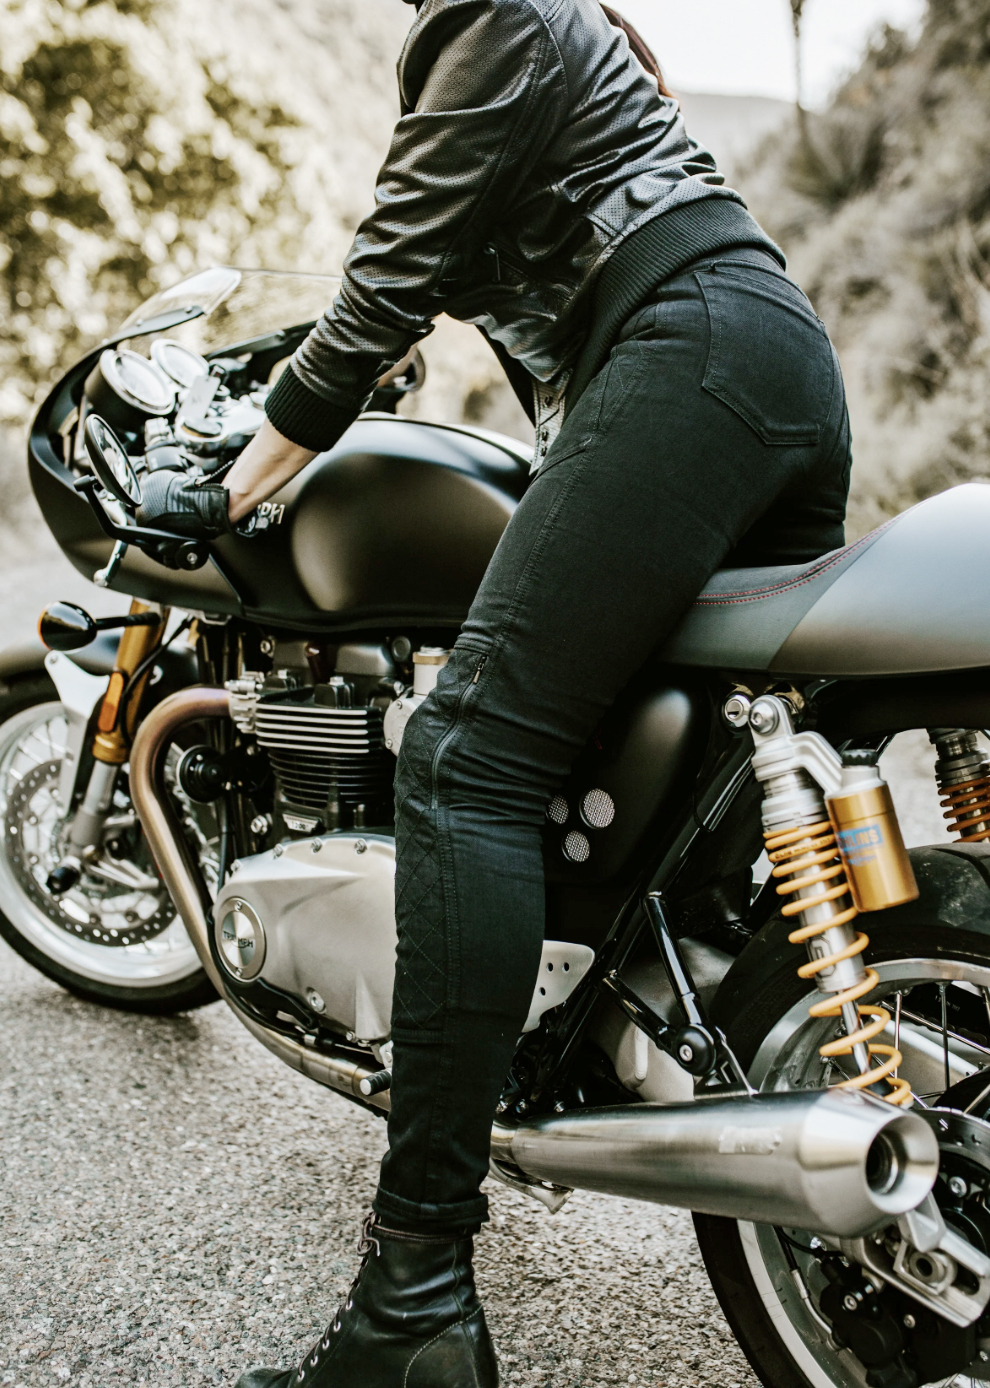 ATWYLD Voyager Moto jeans are slim-fit and come in sizes 24 to 40. They retail for $330.